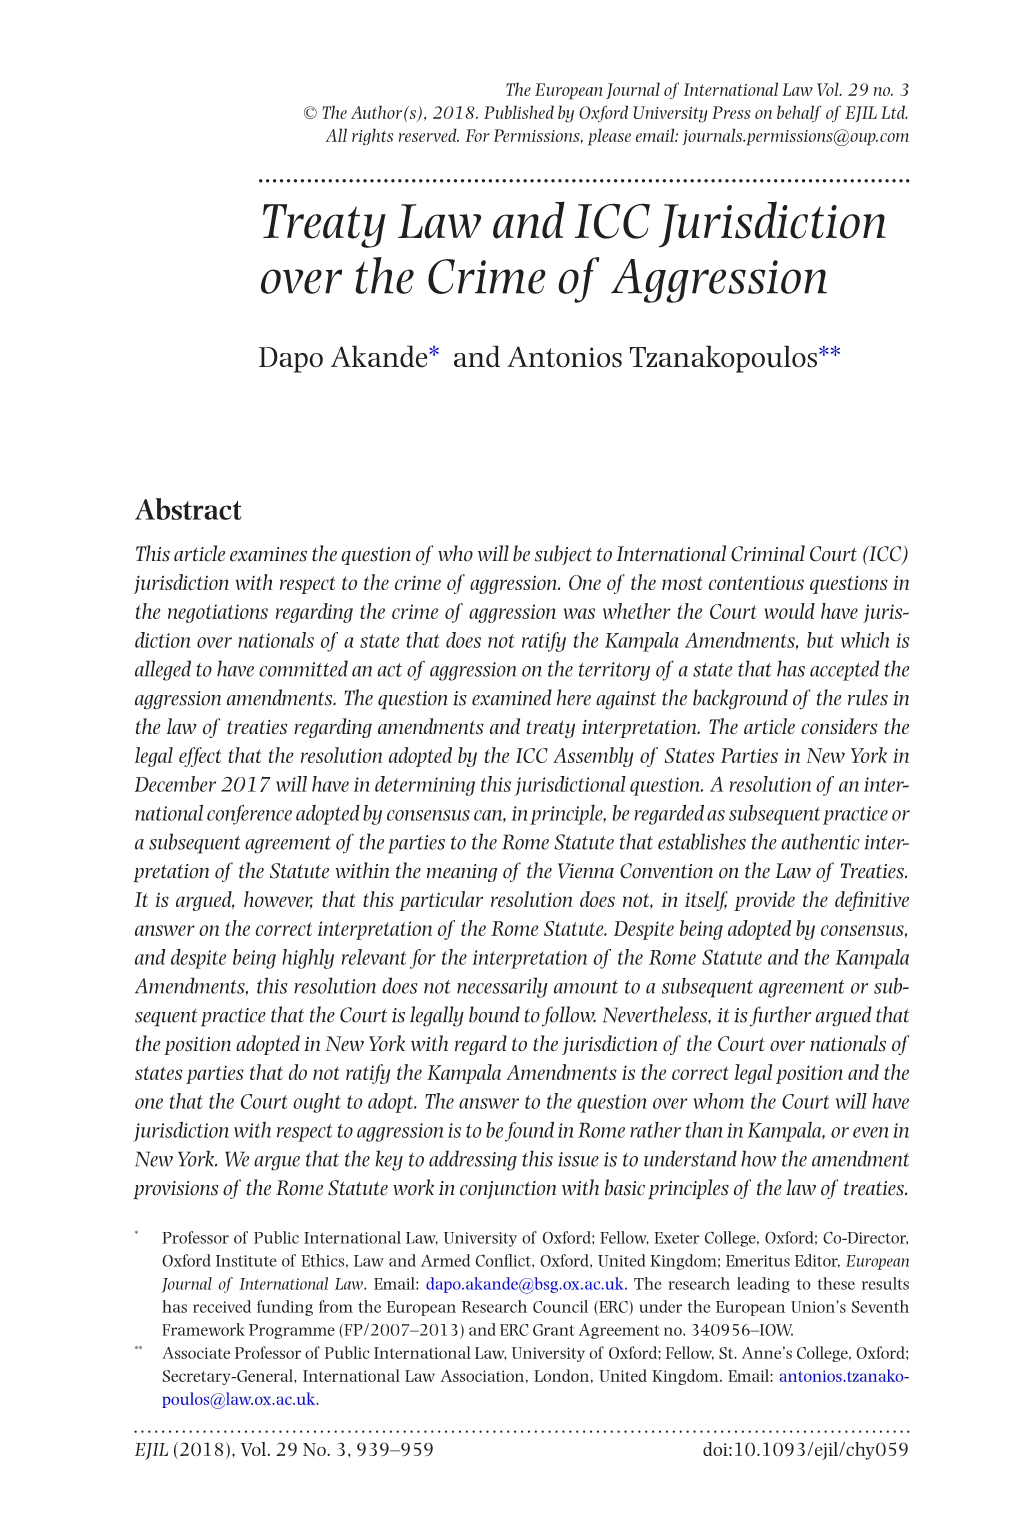 Treaty Law and ICC Jurisdiction Over the Crime of Aggression